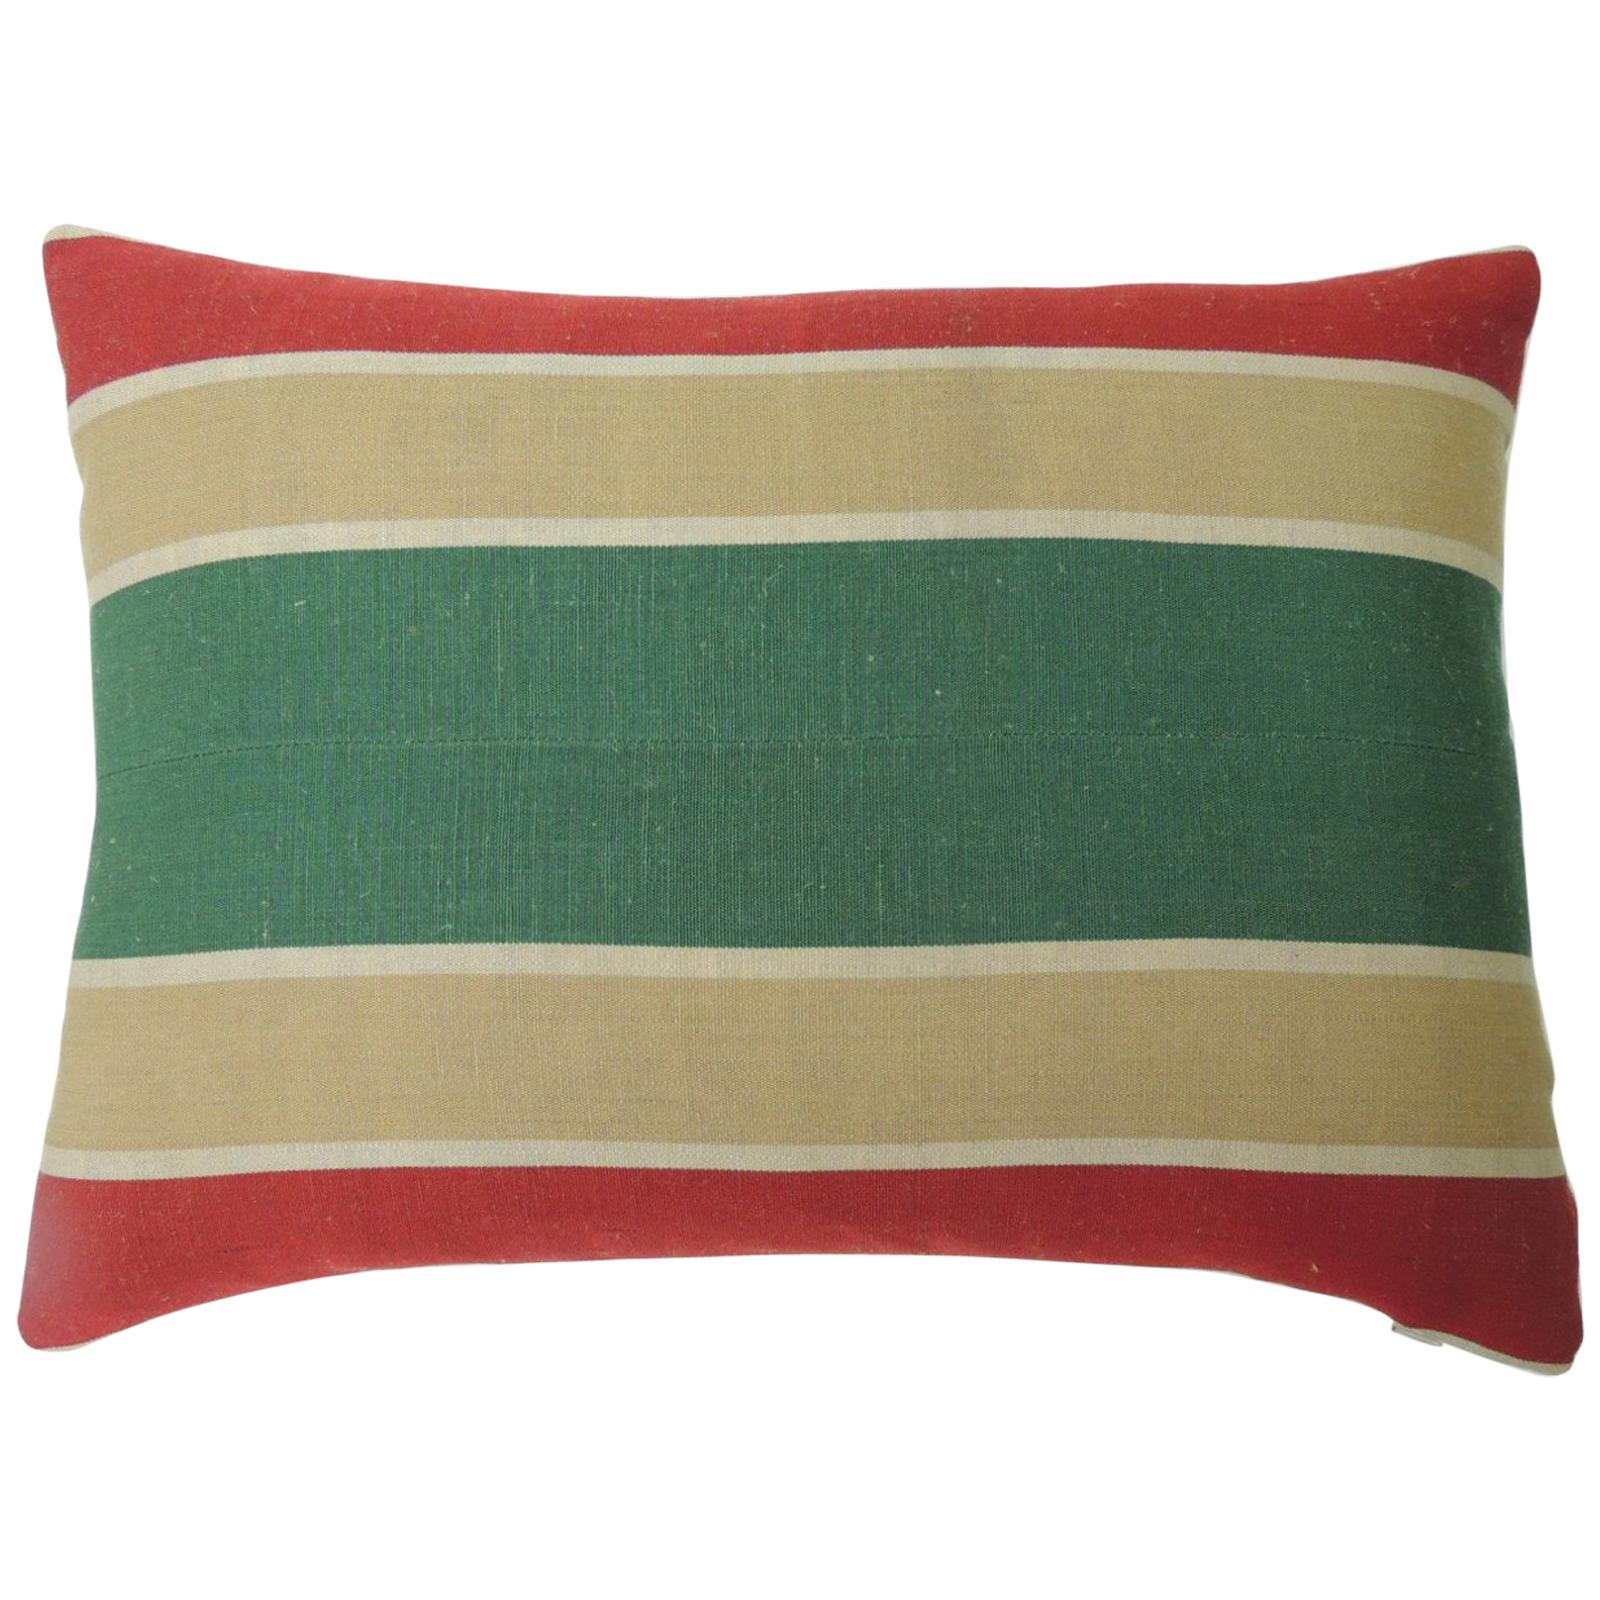 Red and Green "Holiday" Stripes Decorative Bolster Pillow